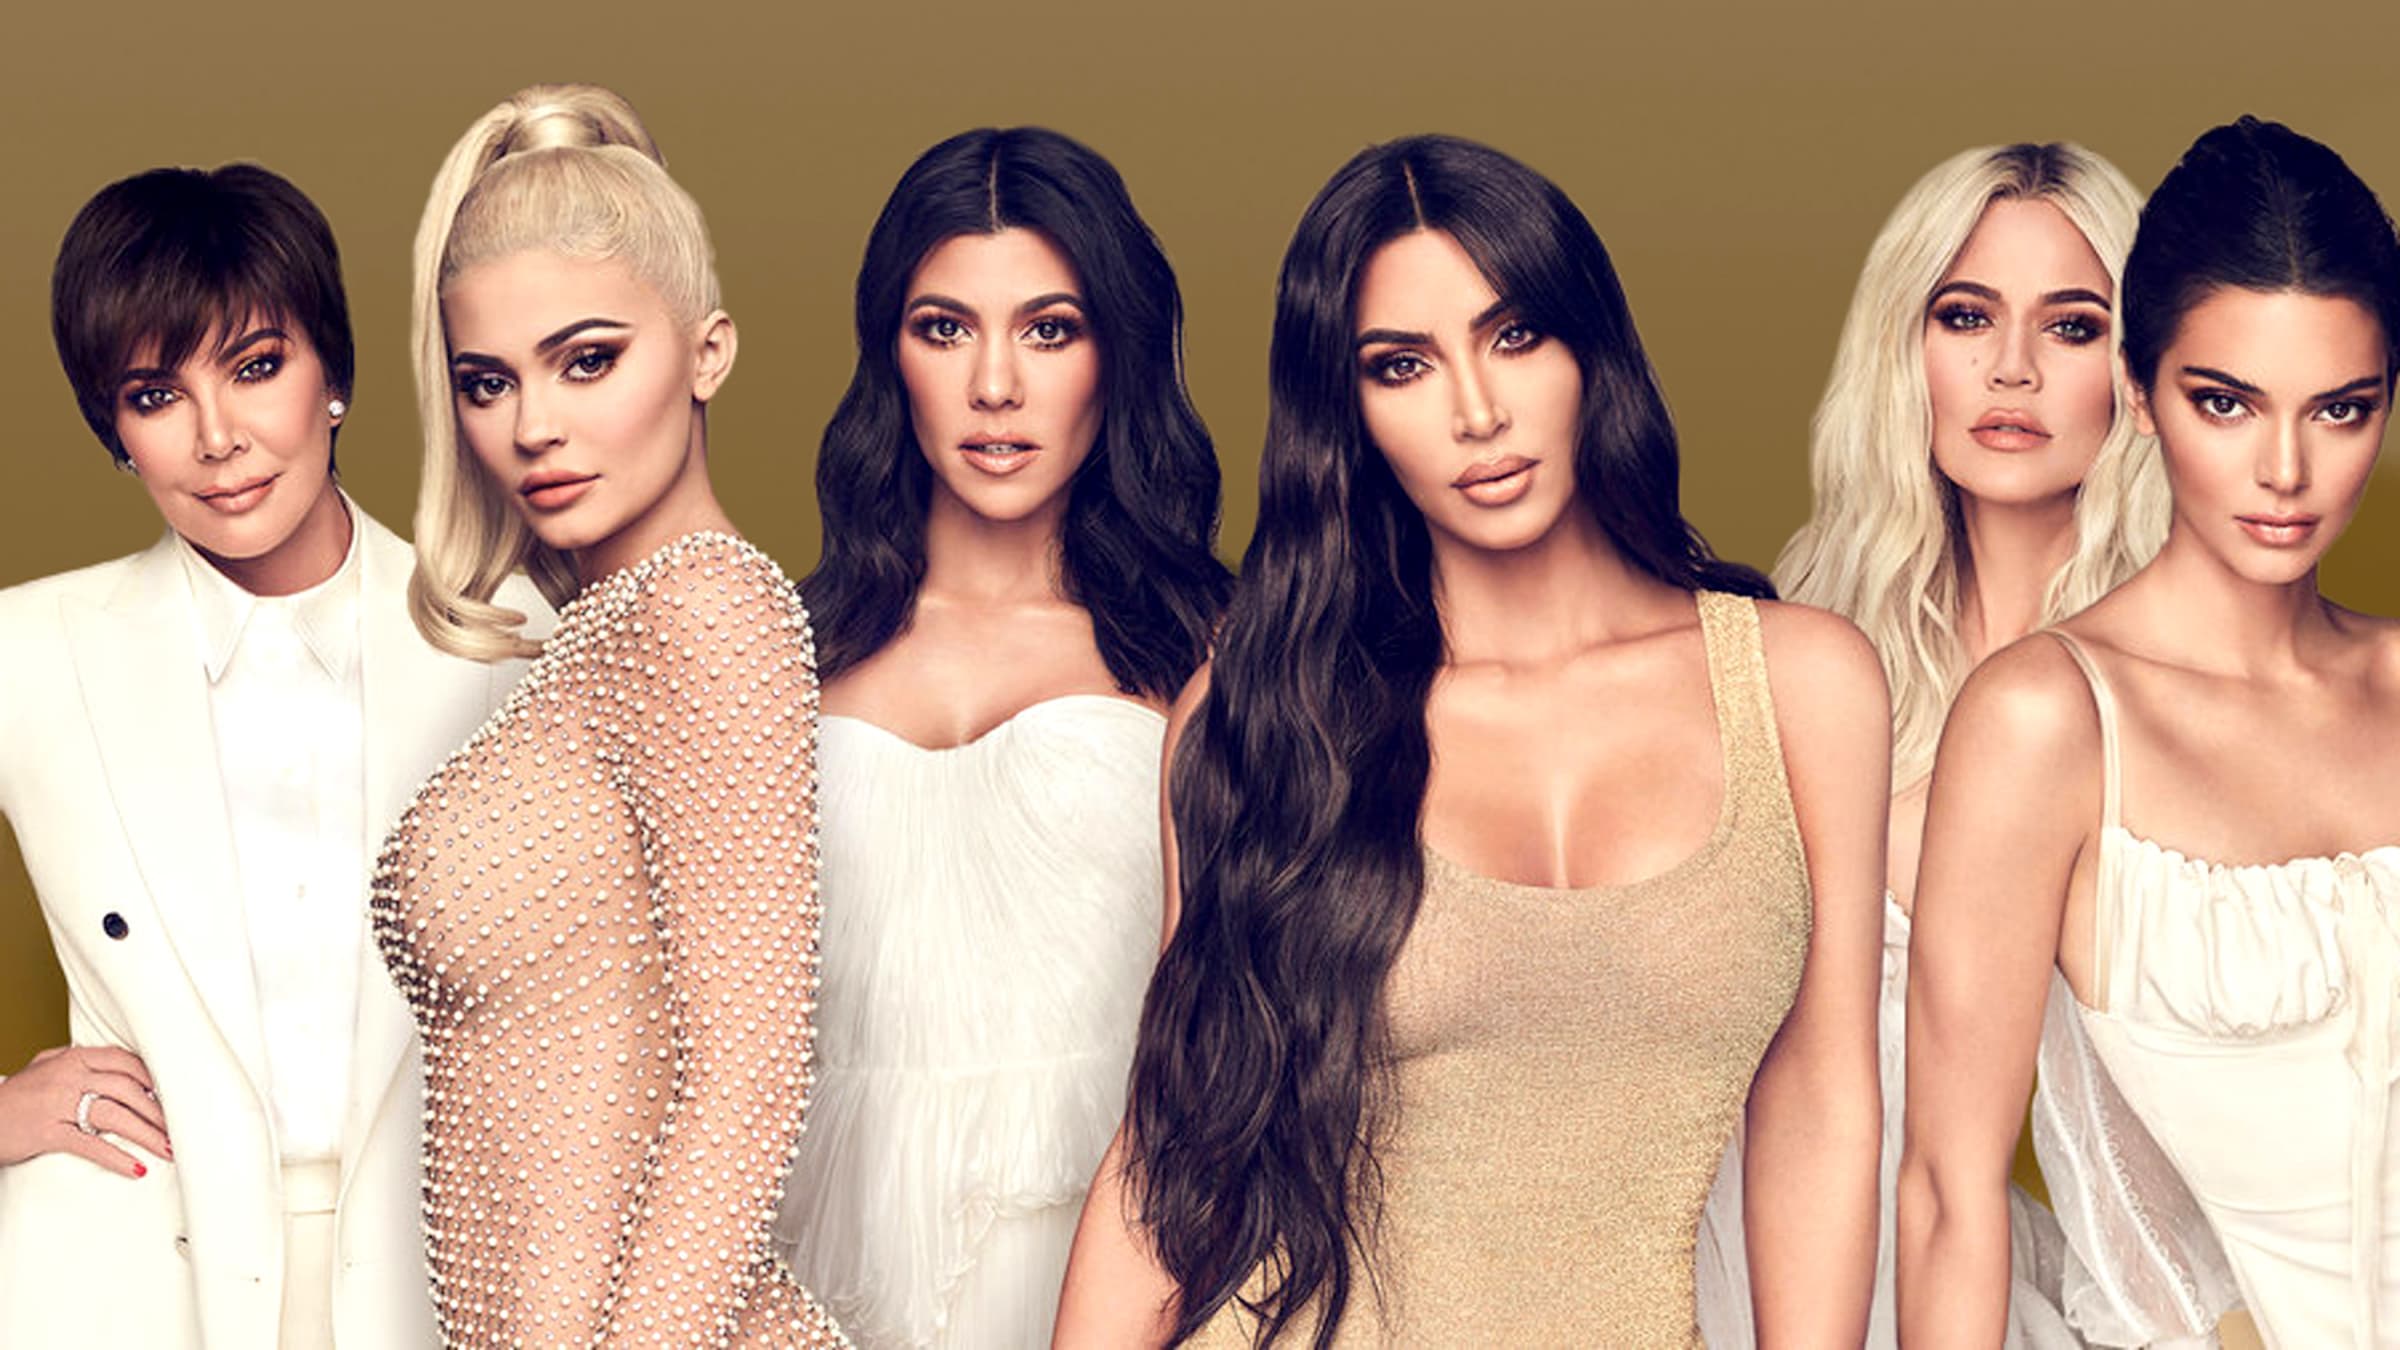 2400px x 1350px - Why America Turned on the Kardashians